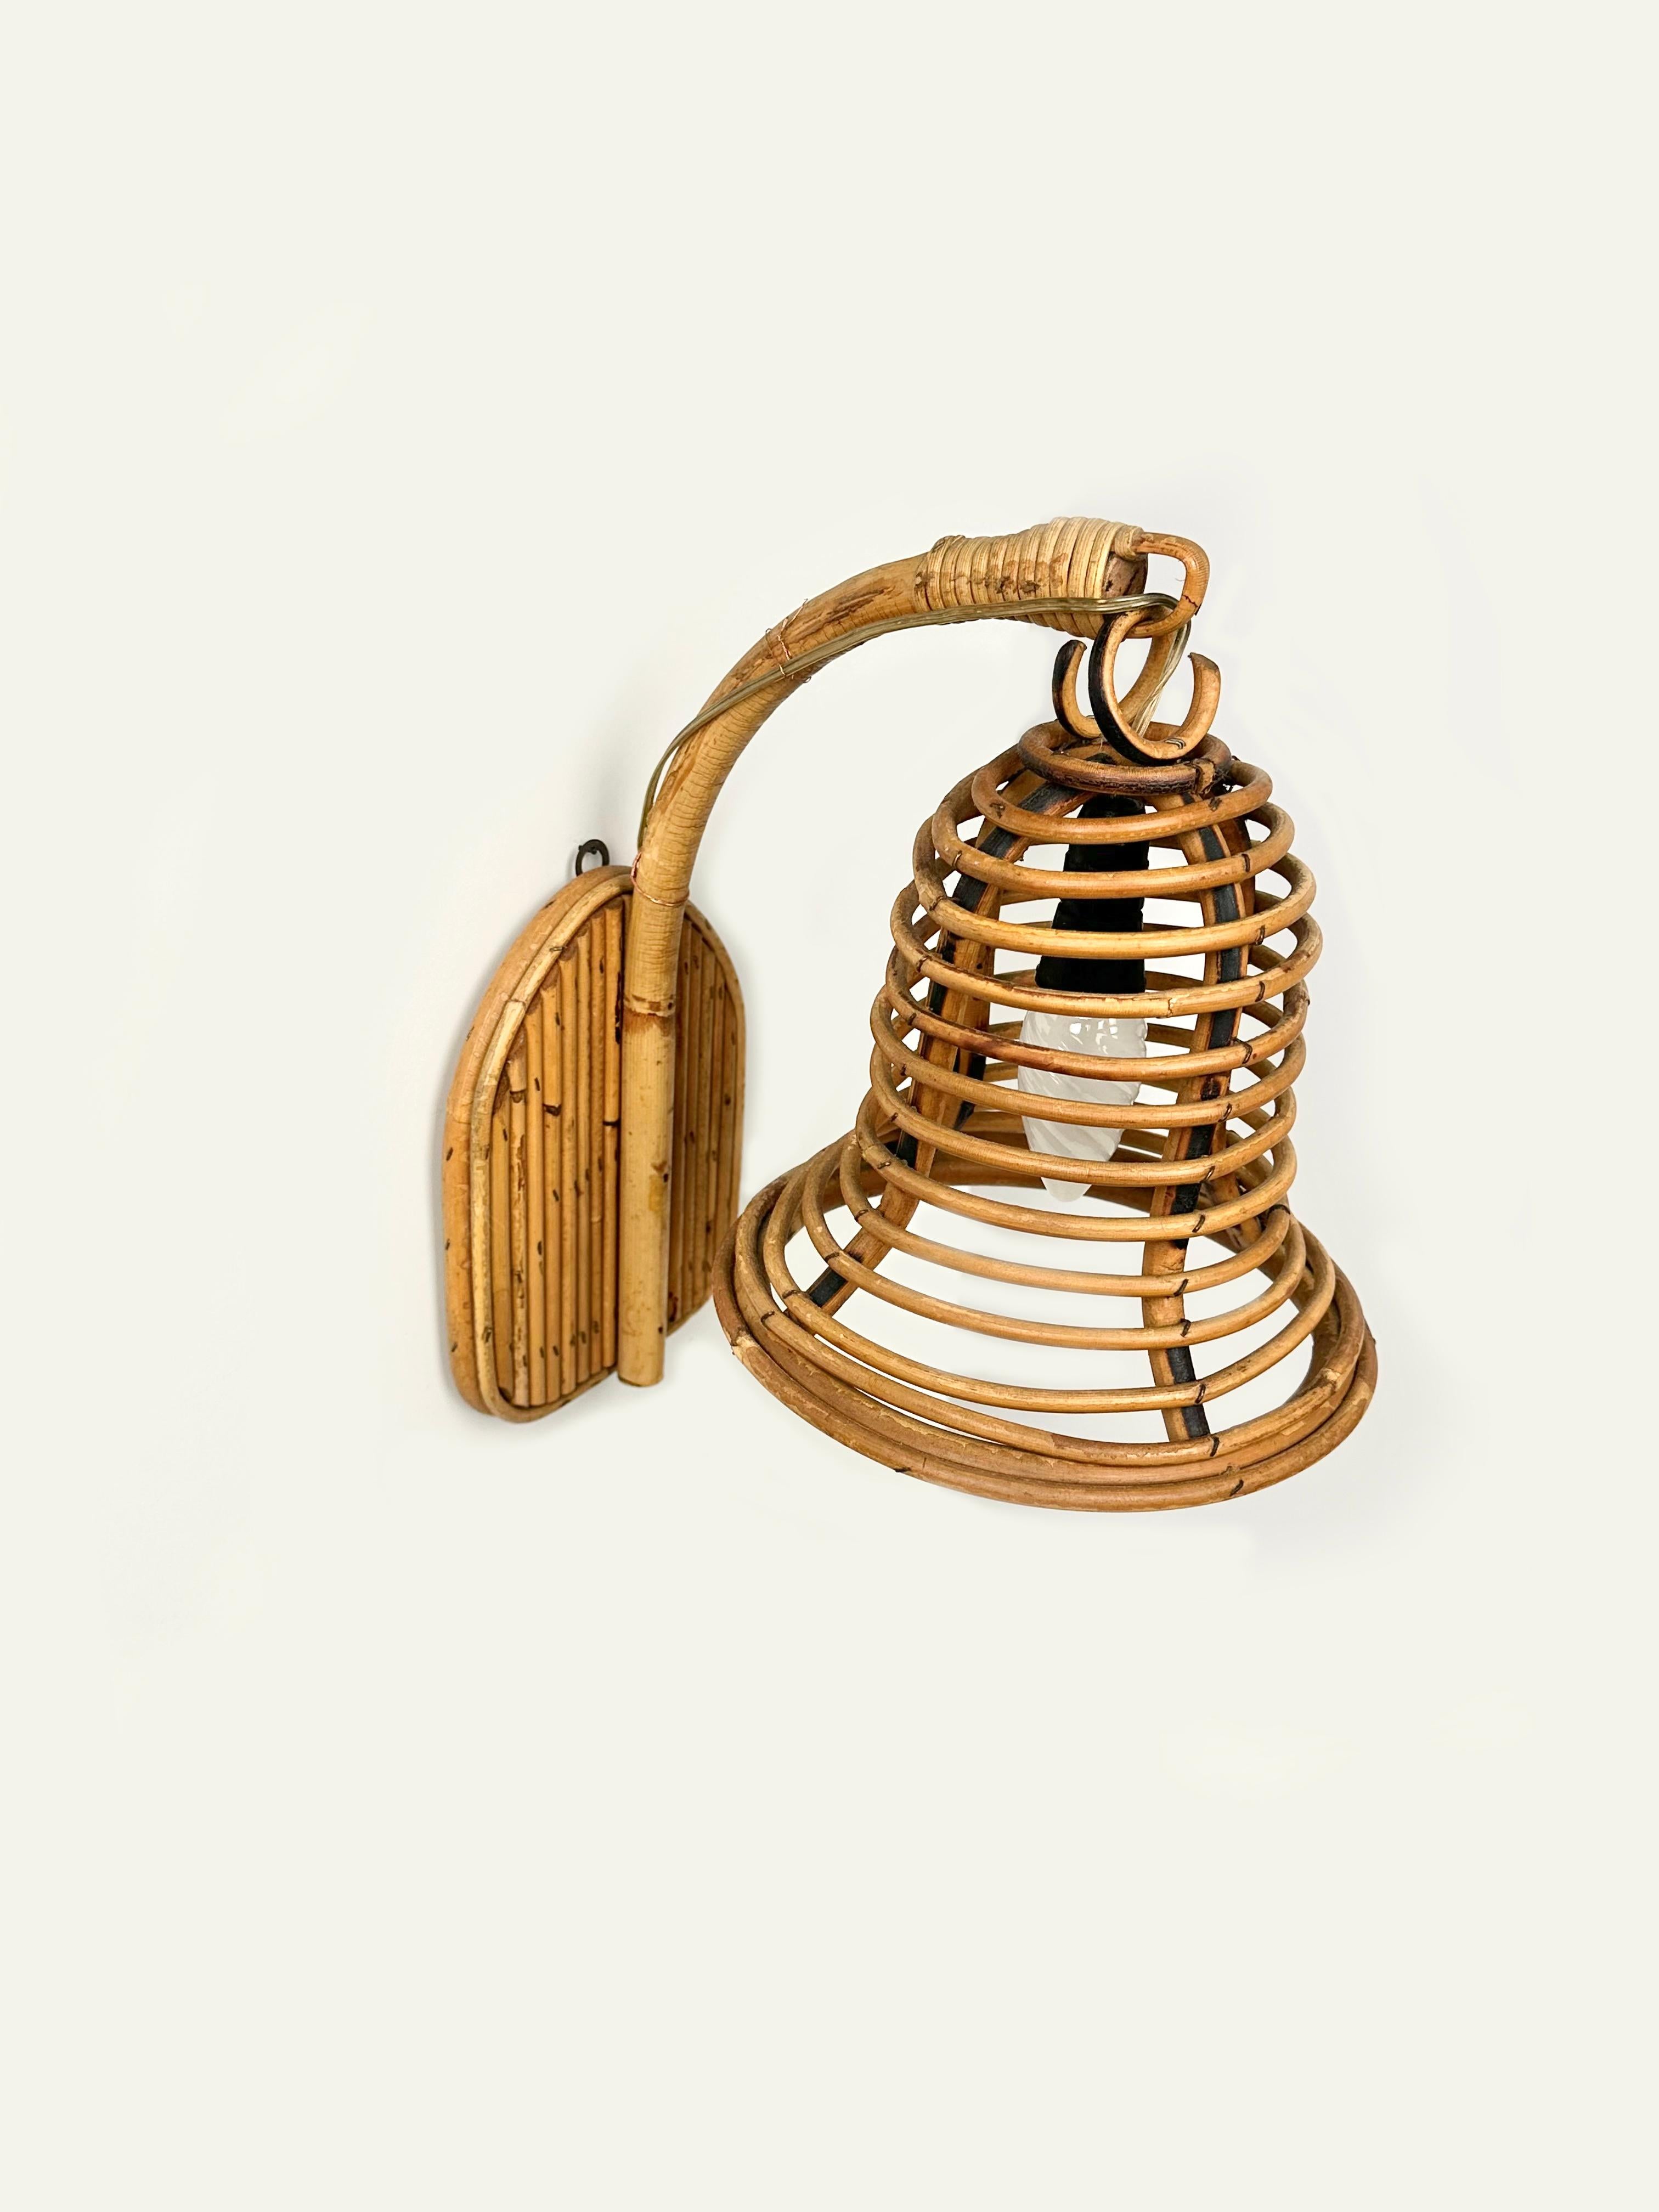 Italian Rattan & Bamboo Sconce Wall Lamp Lantern Louis Sognot Style, Italy, 1960s For Sale